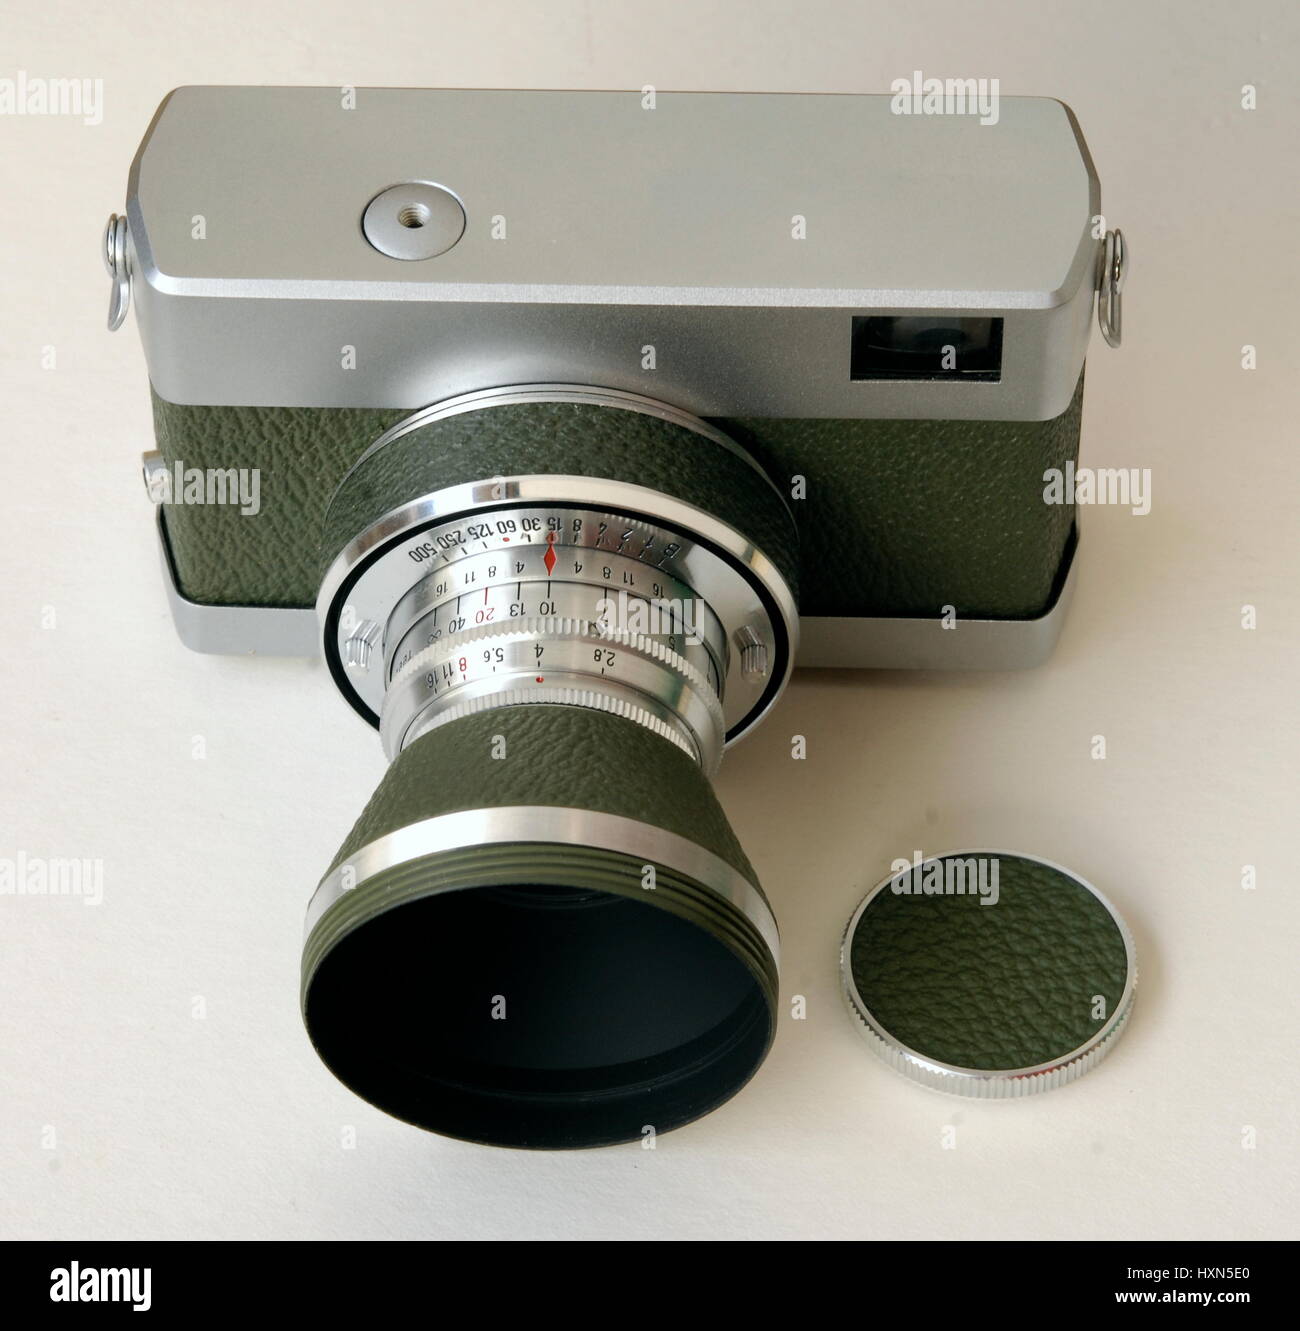 AJAXNETPHOTO. UNITED KINGDOM. - EAST GERMAN CAMERA - ORIGINAL WERRA 1 35MM FORMAT ANALOG FILM CAMERA WITH OLIVE GREEN LEATHERETTE COVERING MADE BY CARL ZEISS JENA SHOWN HERE WITH PROTECTIVE LENS BARREL COVER FITTED AS LENS HOOD AND LENS CAP. PHOTO:JONATHAN EASTLAND/AJAX REF:D122405 2401 Stock Photo